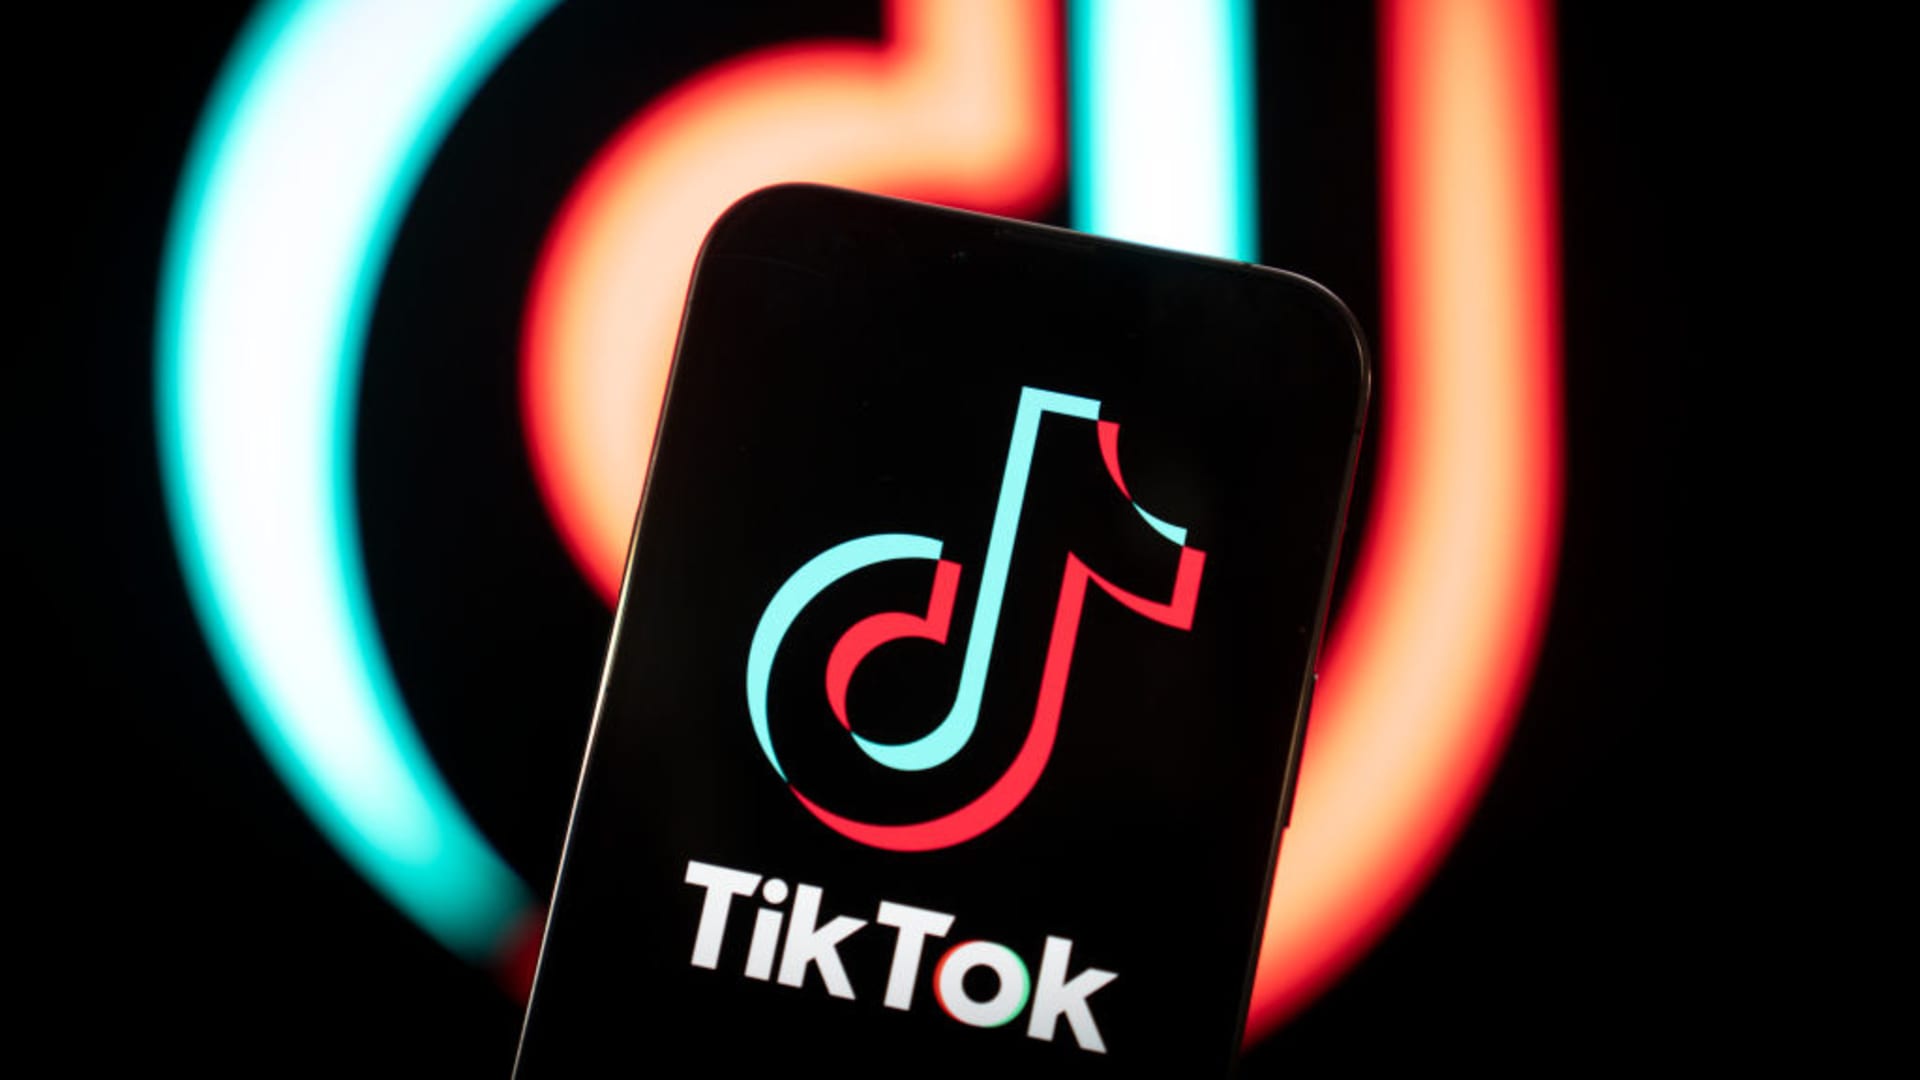 Tech Giant TikTok Announces 60 Job Cuts as Industry Layoffs Persist in January